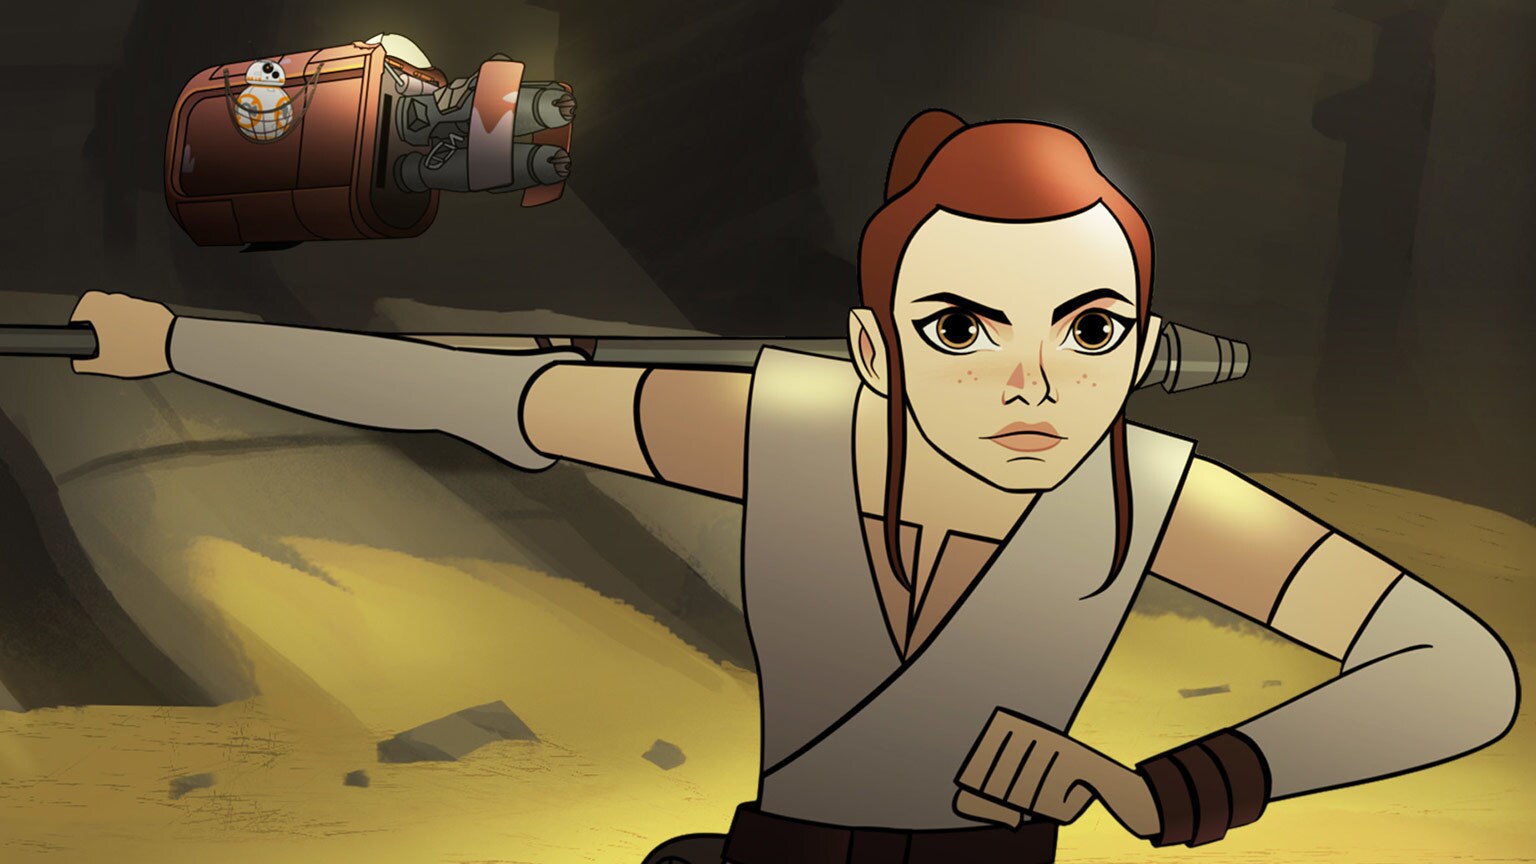 Rey, Ahsoka Tano, and More Iconic Heroes to Star in New Star Wars Forces of Destiny Animated Micro-Series